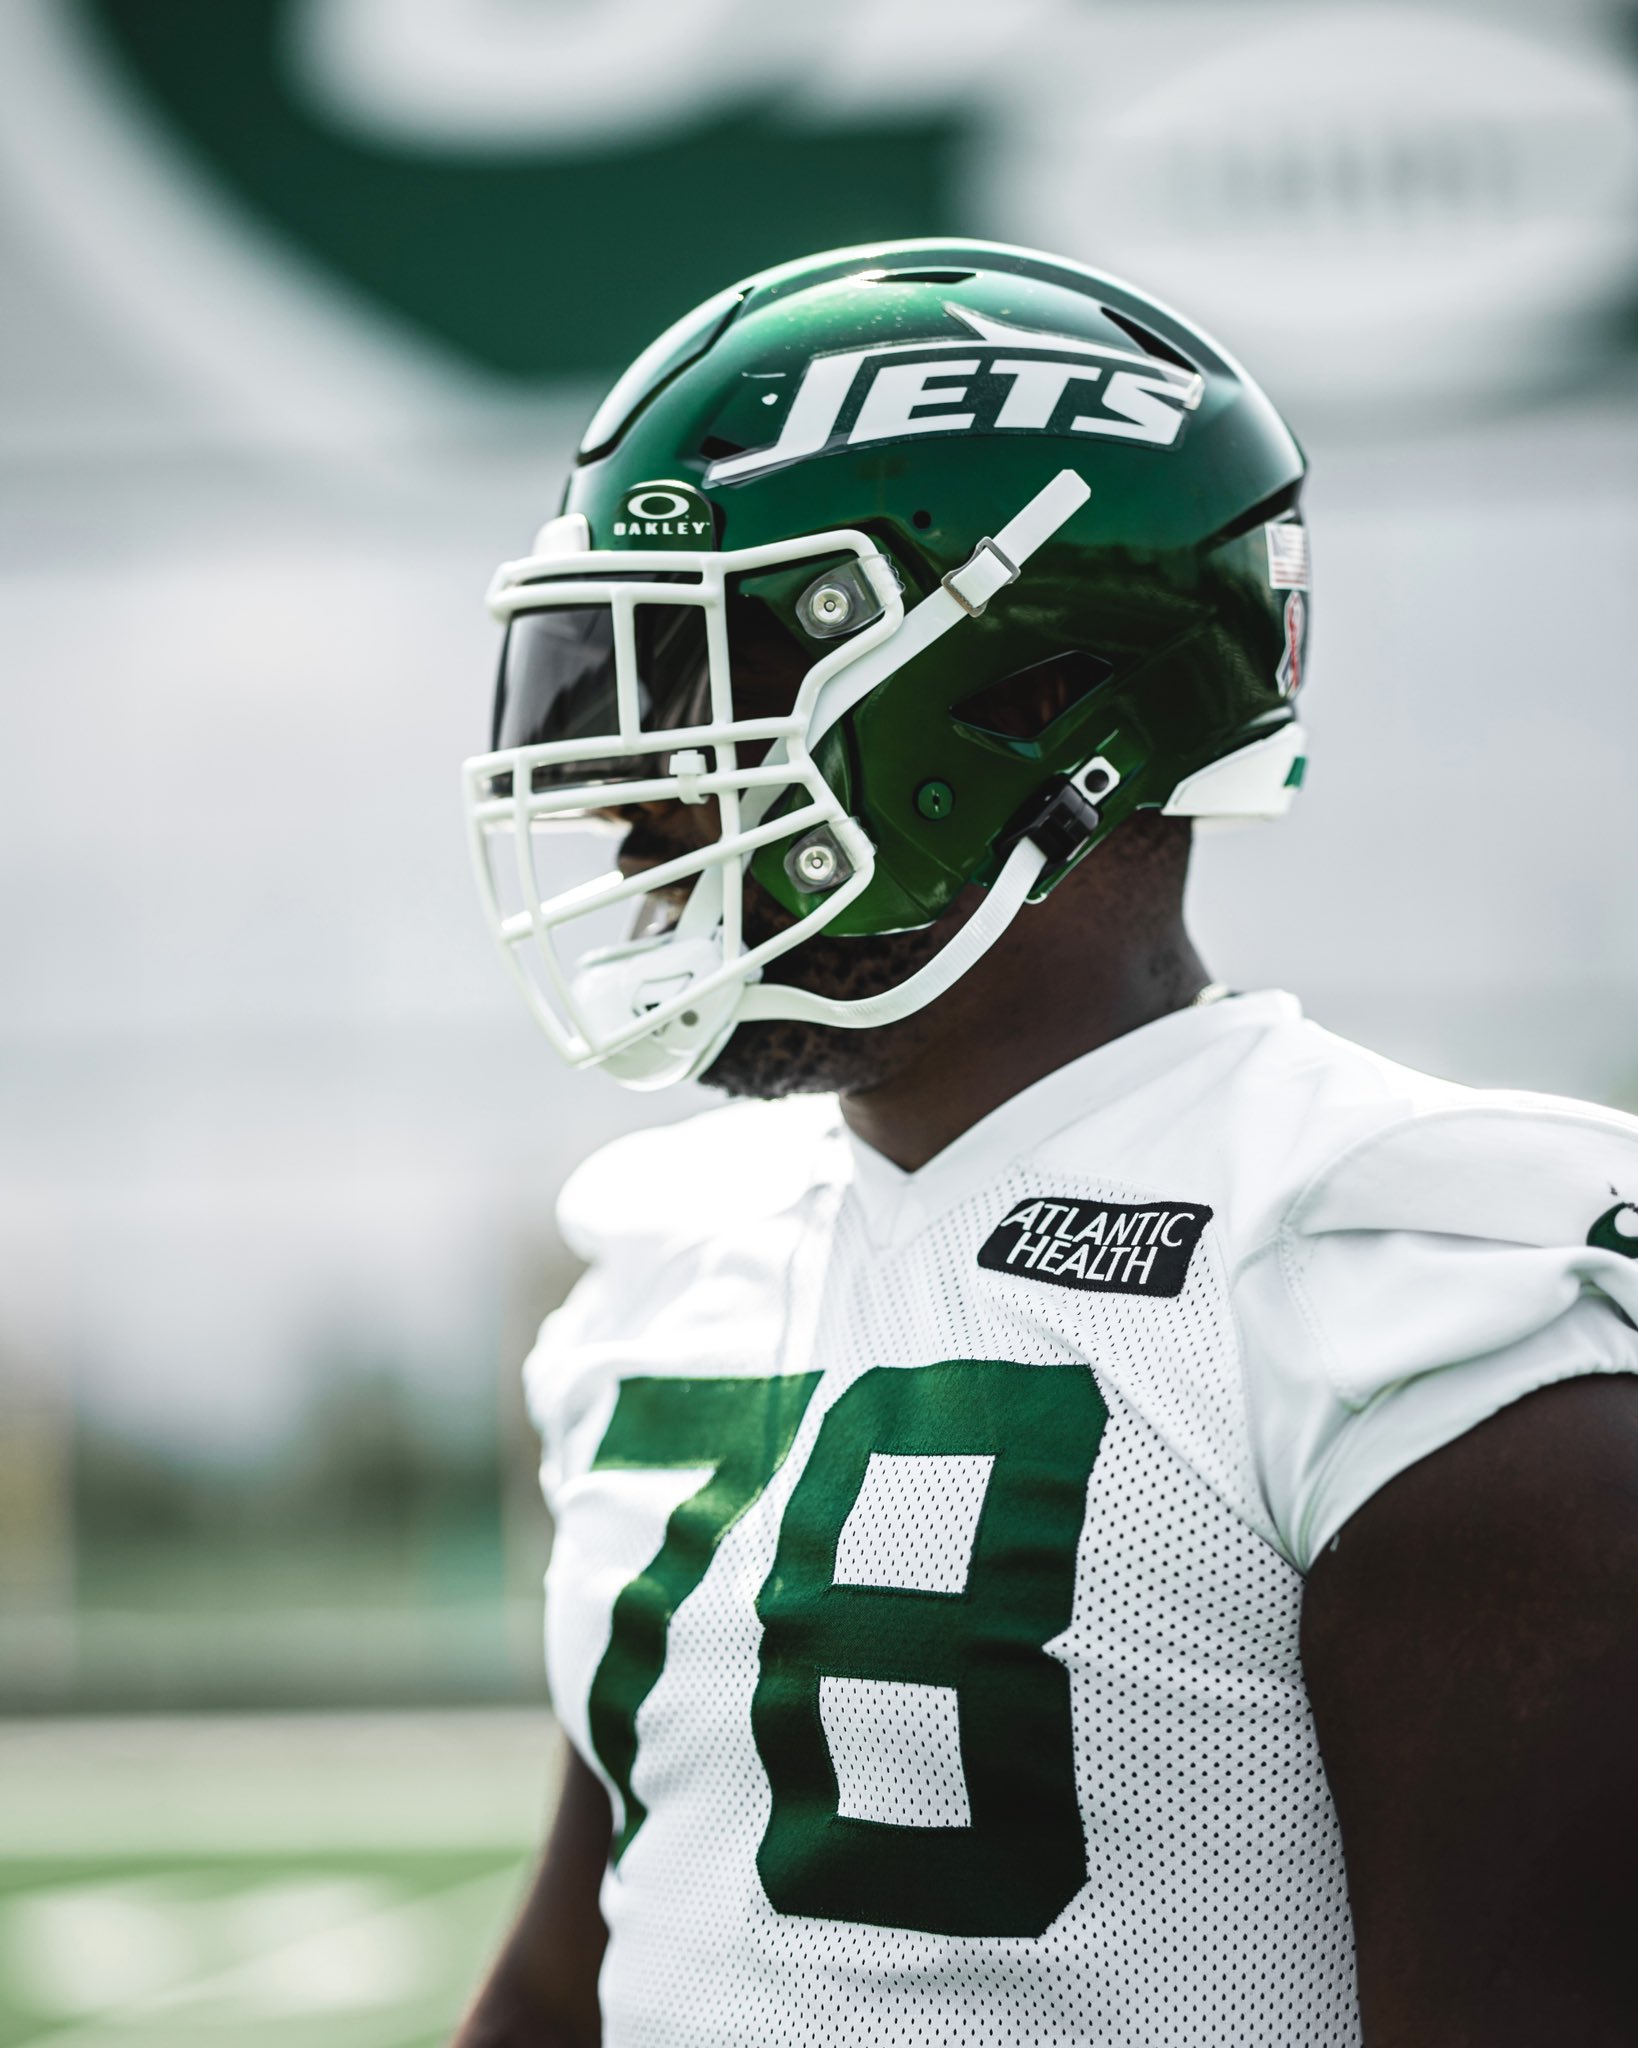 The #Jets may have hinted at a future throwback in their press